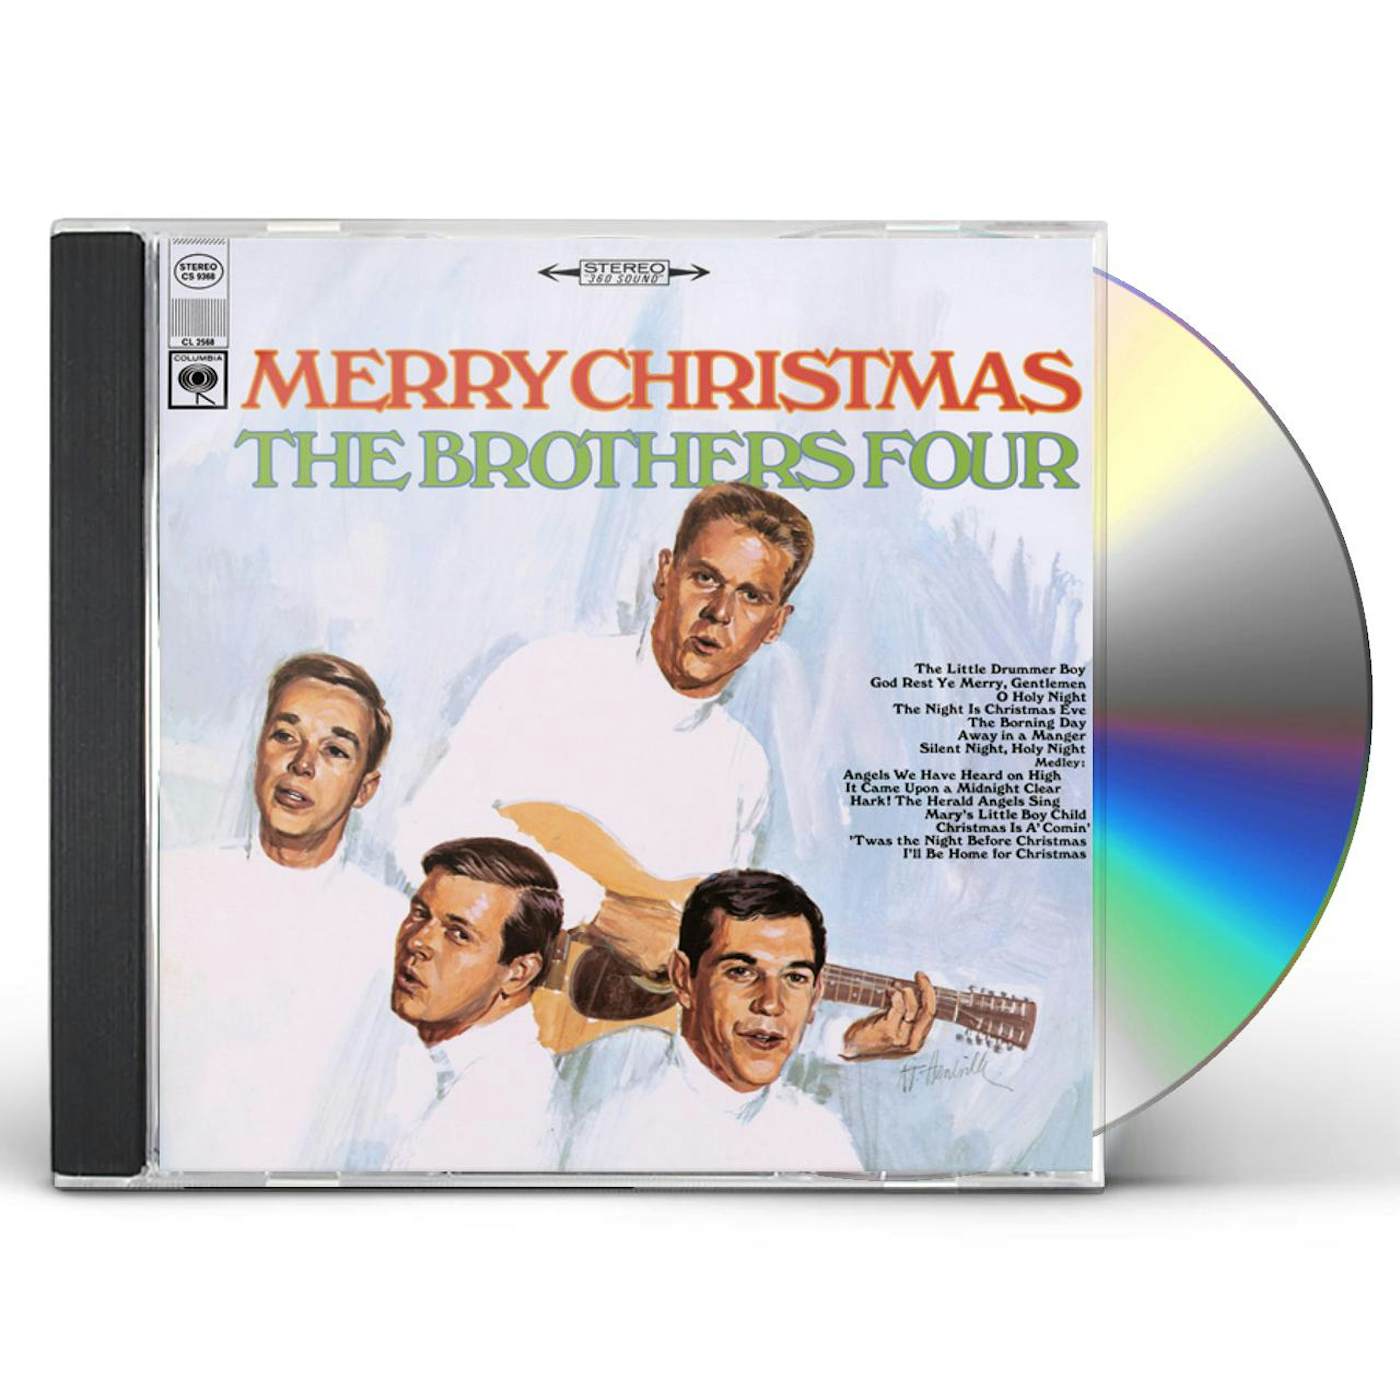 The Brothers Four MERRY CHRISTMAS CD